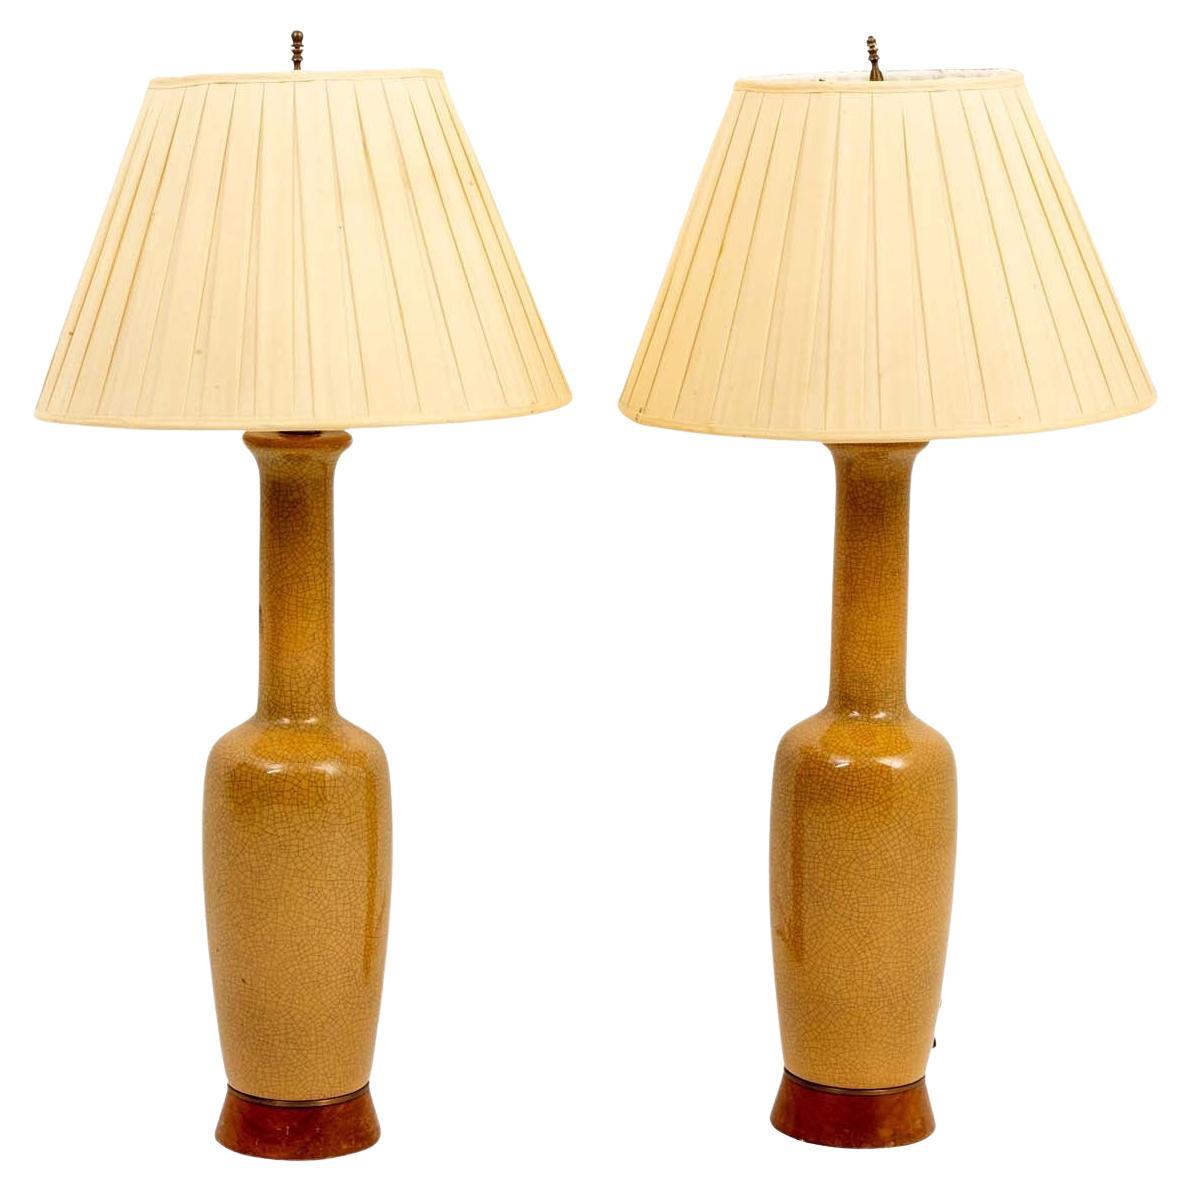 Pair of Mid Century Crackled Porcelain Lamps For Sale